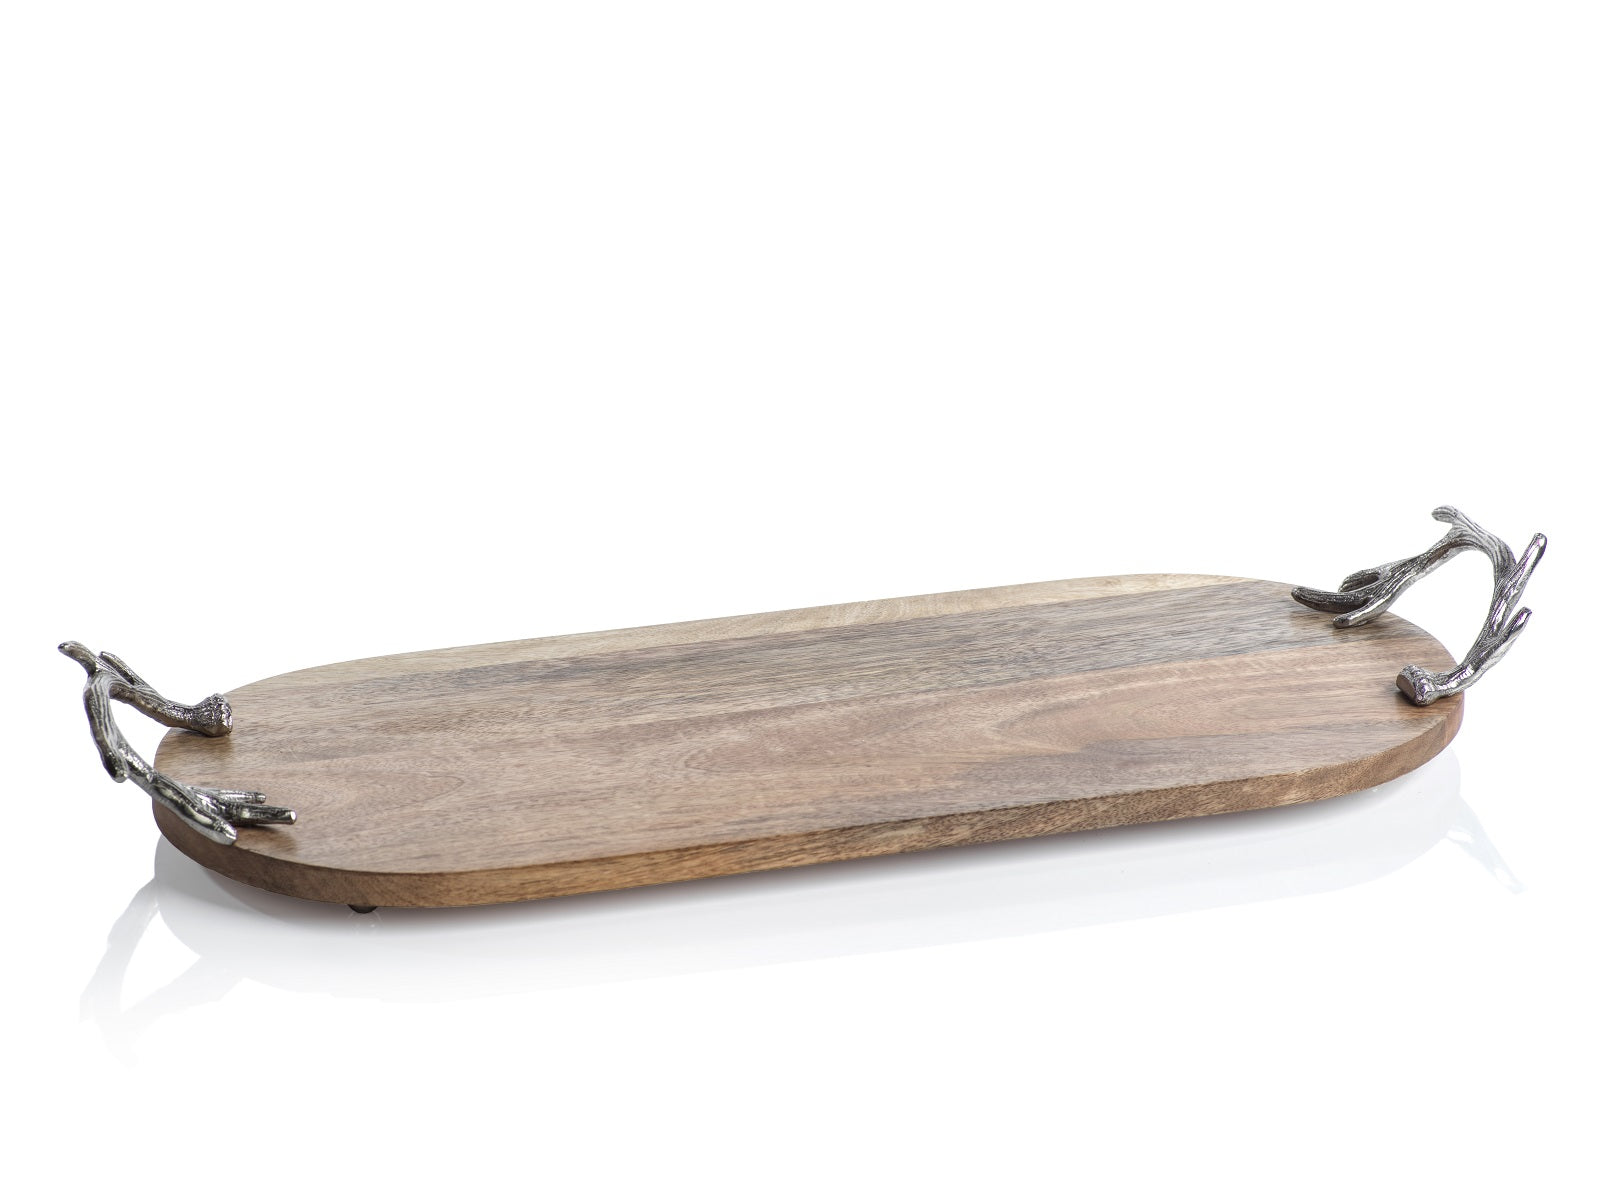 Wooden Oval Tray w/Antler Handles - CARLYLE AVENUE